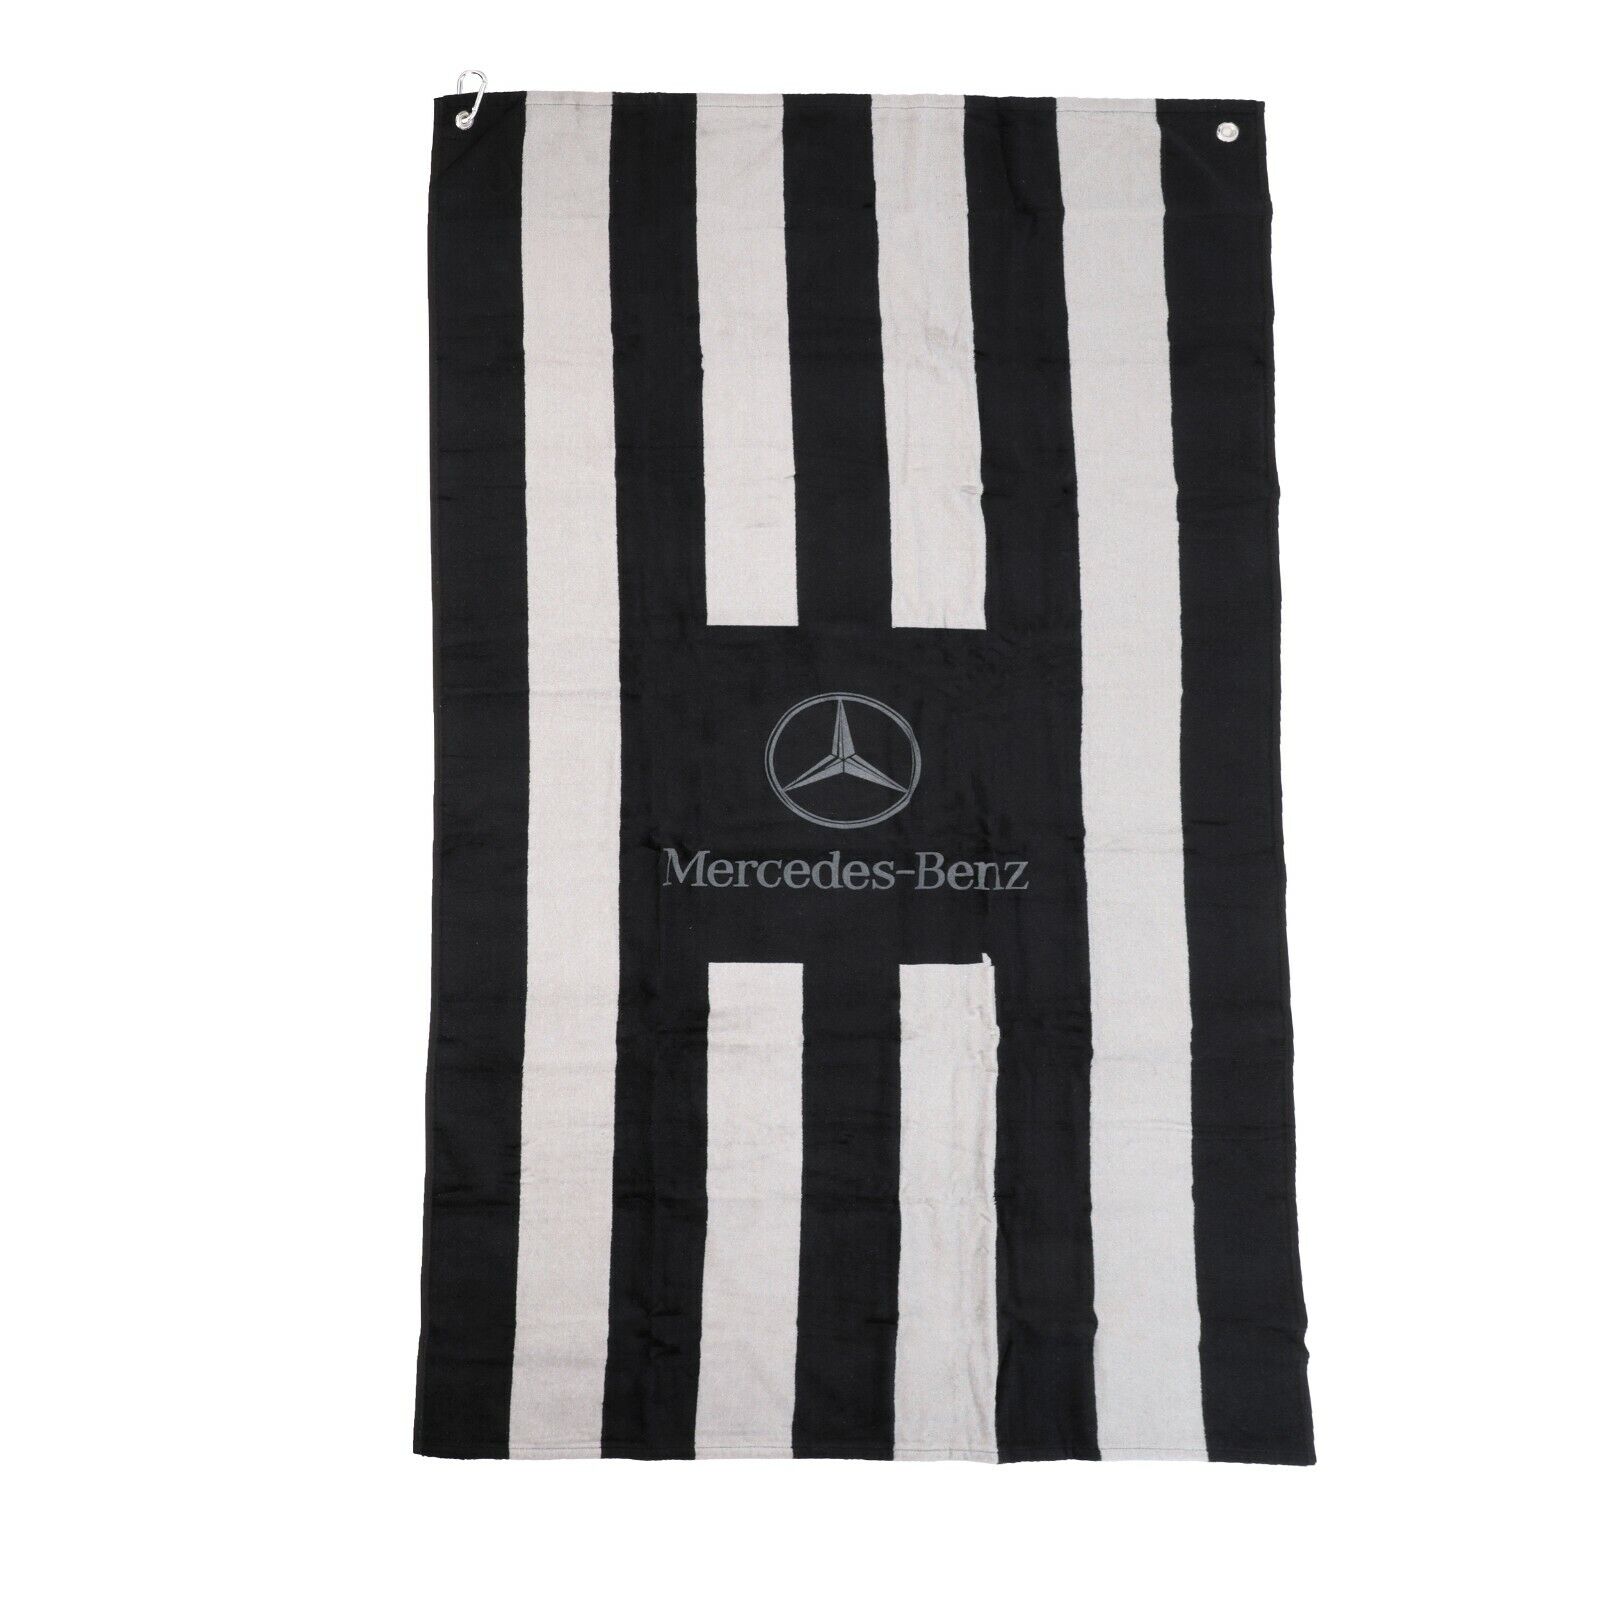 NEW Protective Seat Cover Towel For Mercedes-Benz A-Class S-Class AMG GT SL